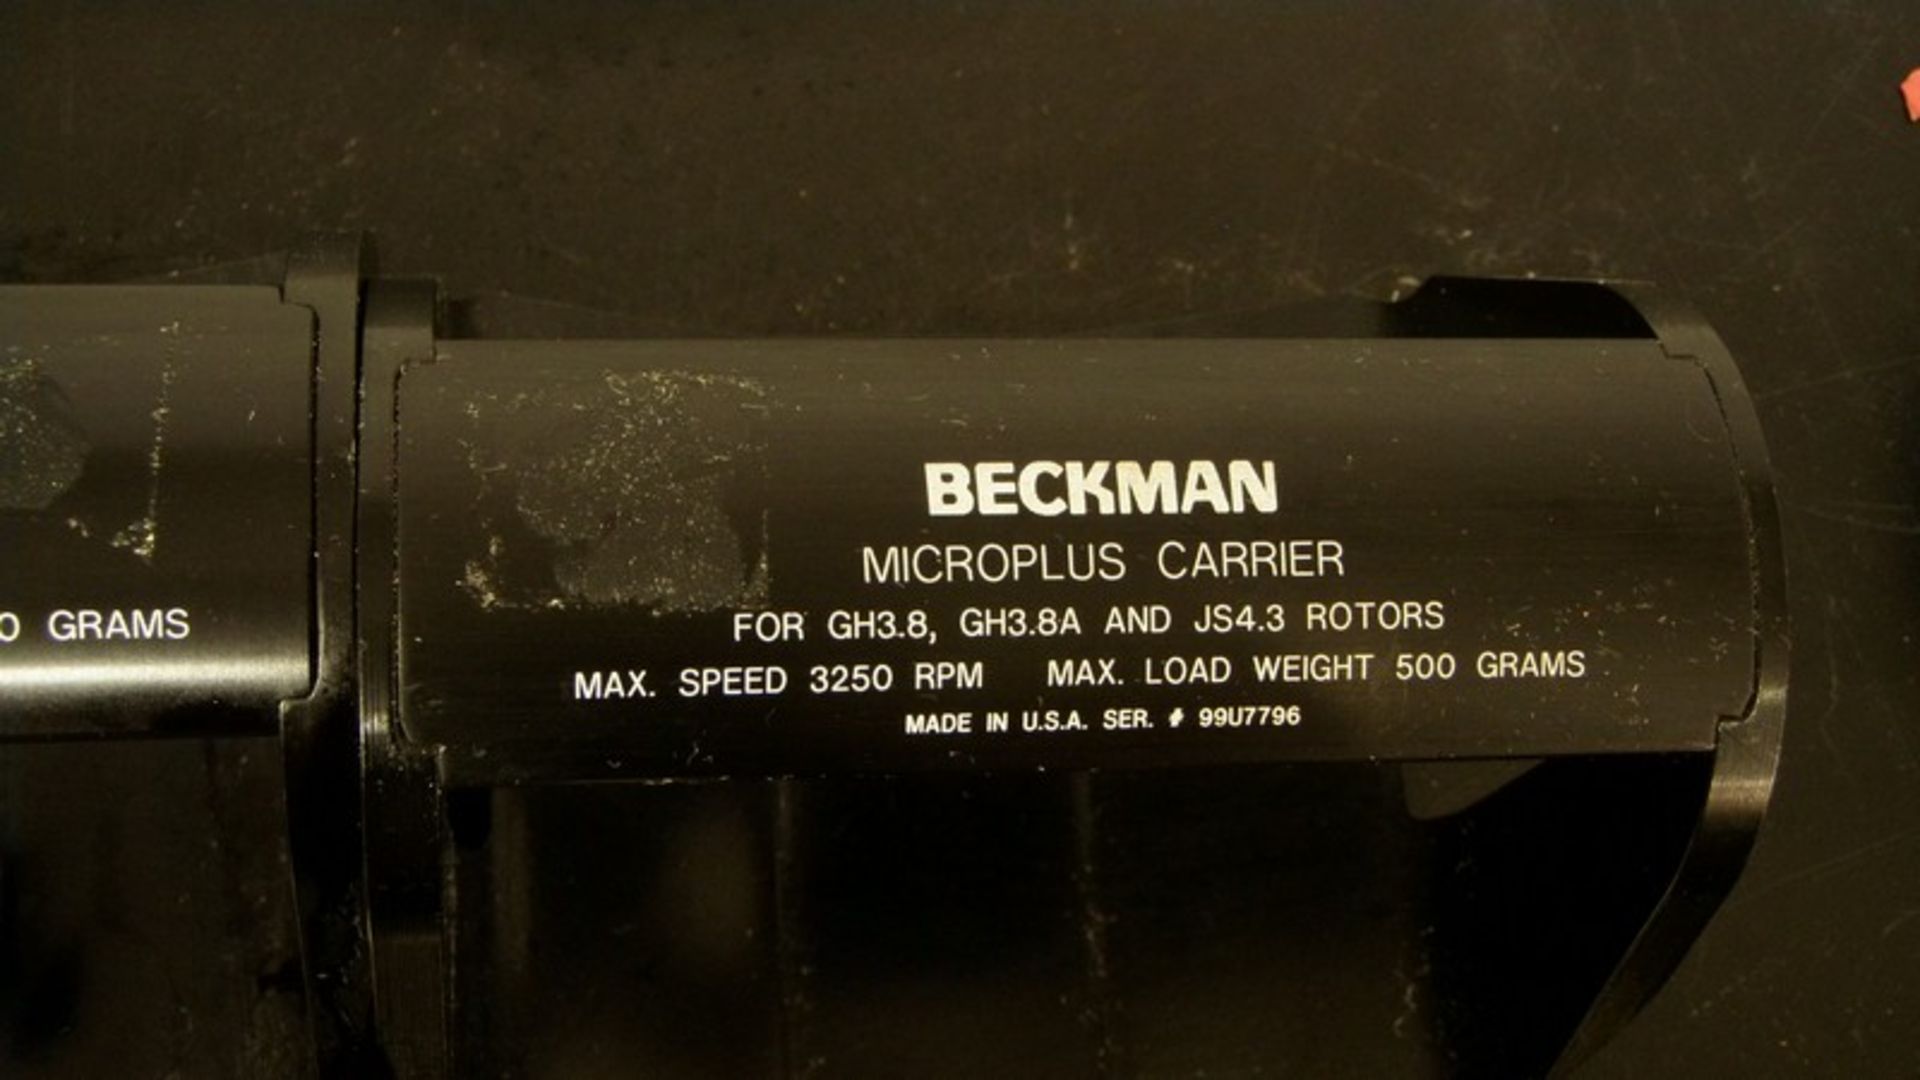 (2) Beckman Microplus Carriers for Use with GH3.8, GH3.8A, and JS4.3 Rotors, Max. Speed 3250, Max - Image 3 of 5